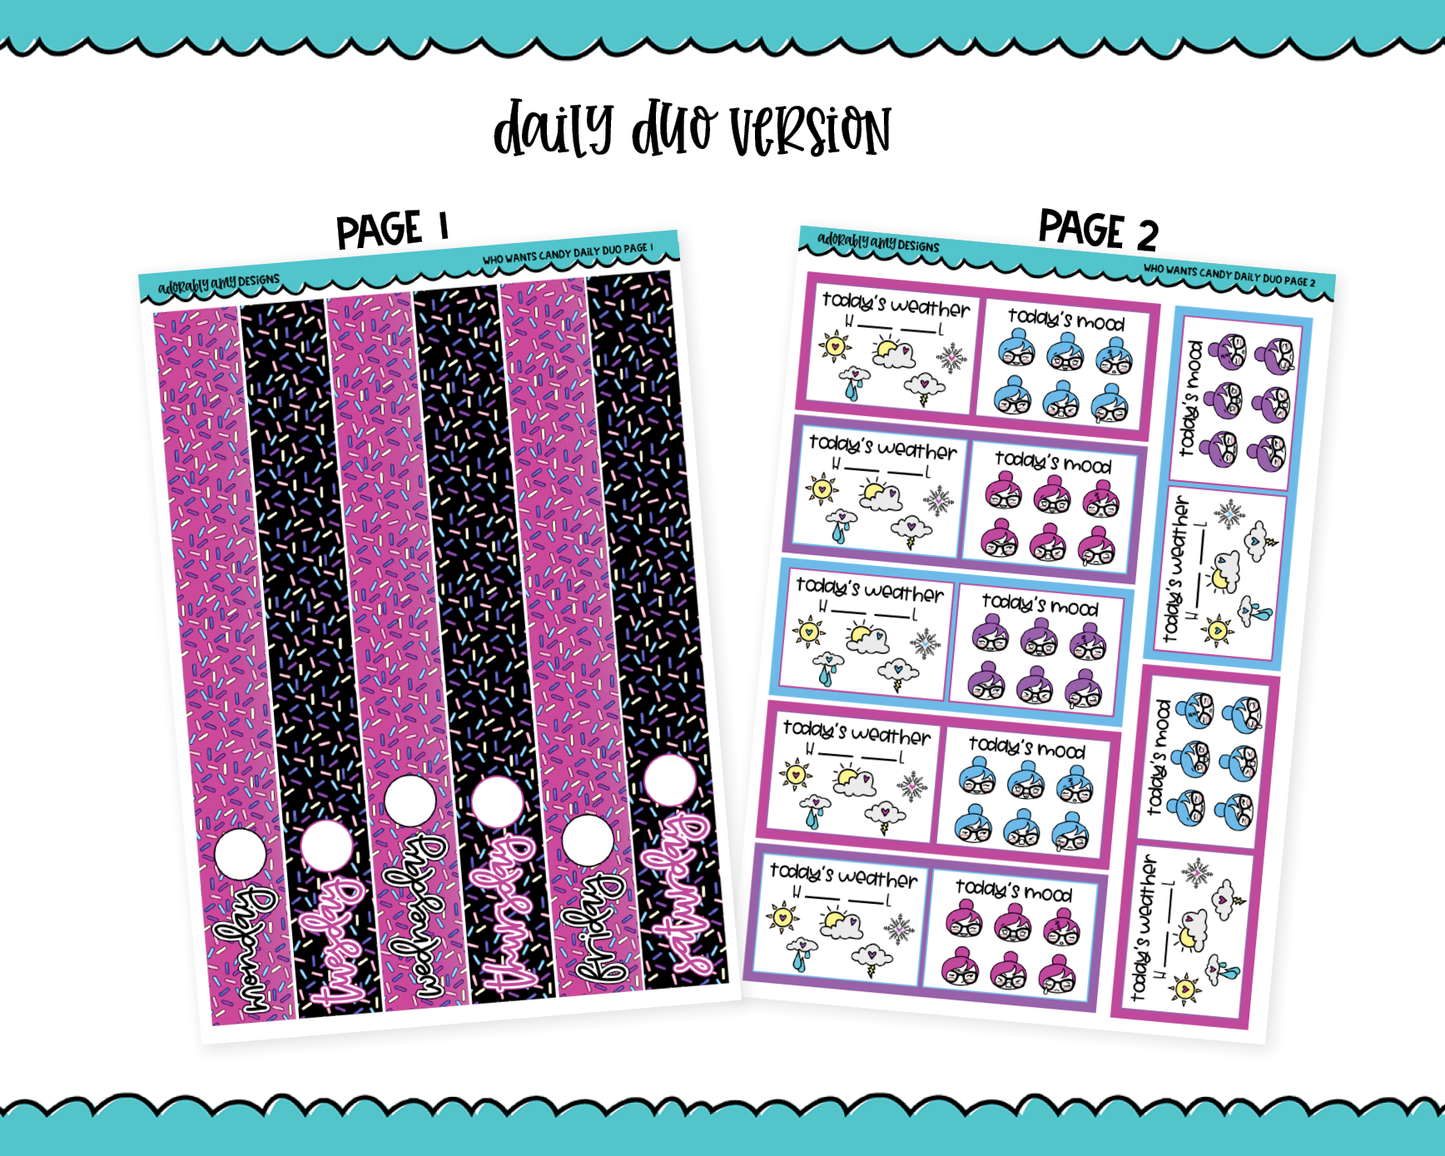 Daily Duo Who Wants Candy Themed Weekly Planner Sticker Kit for Daily Duo Planner